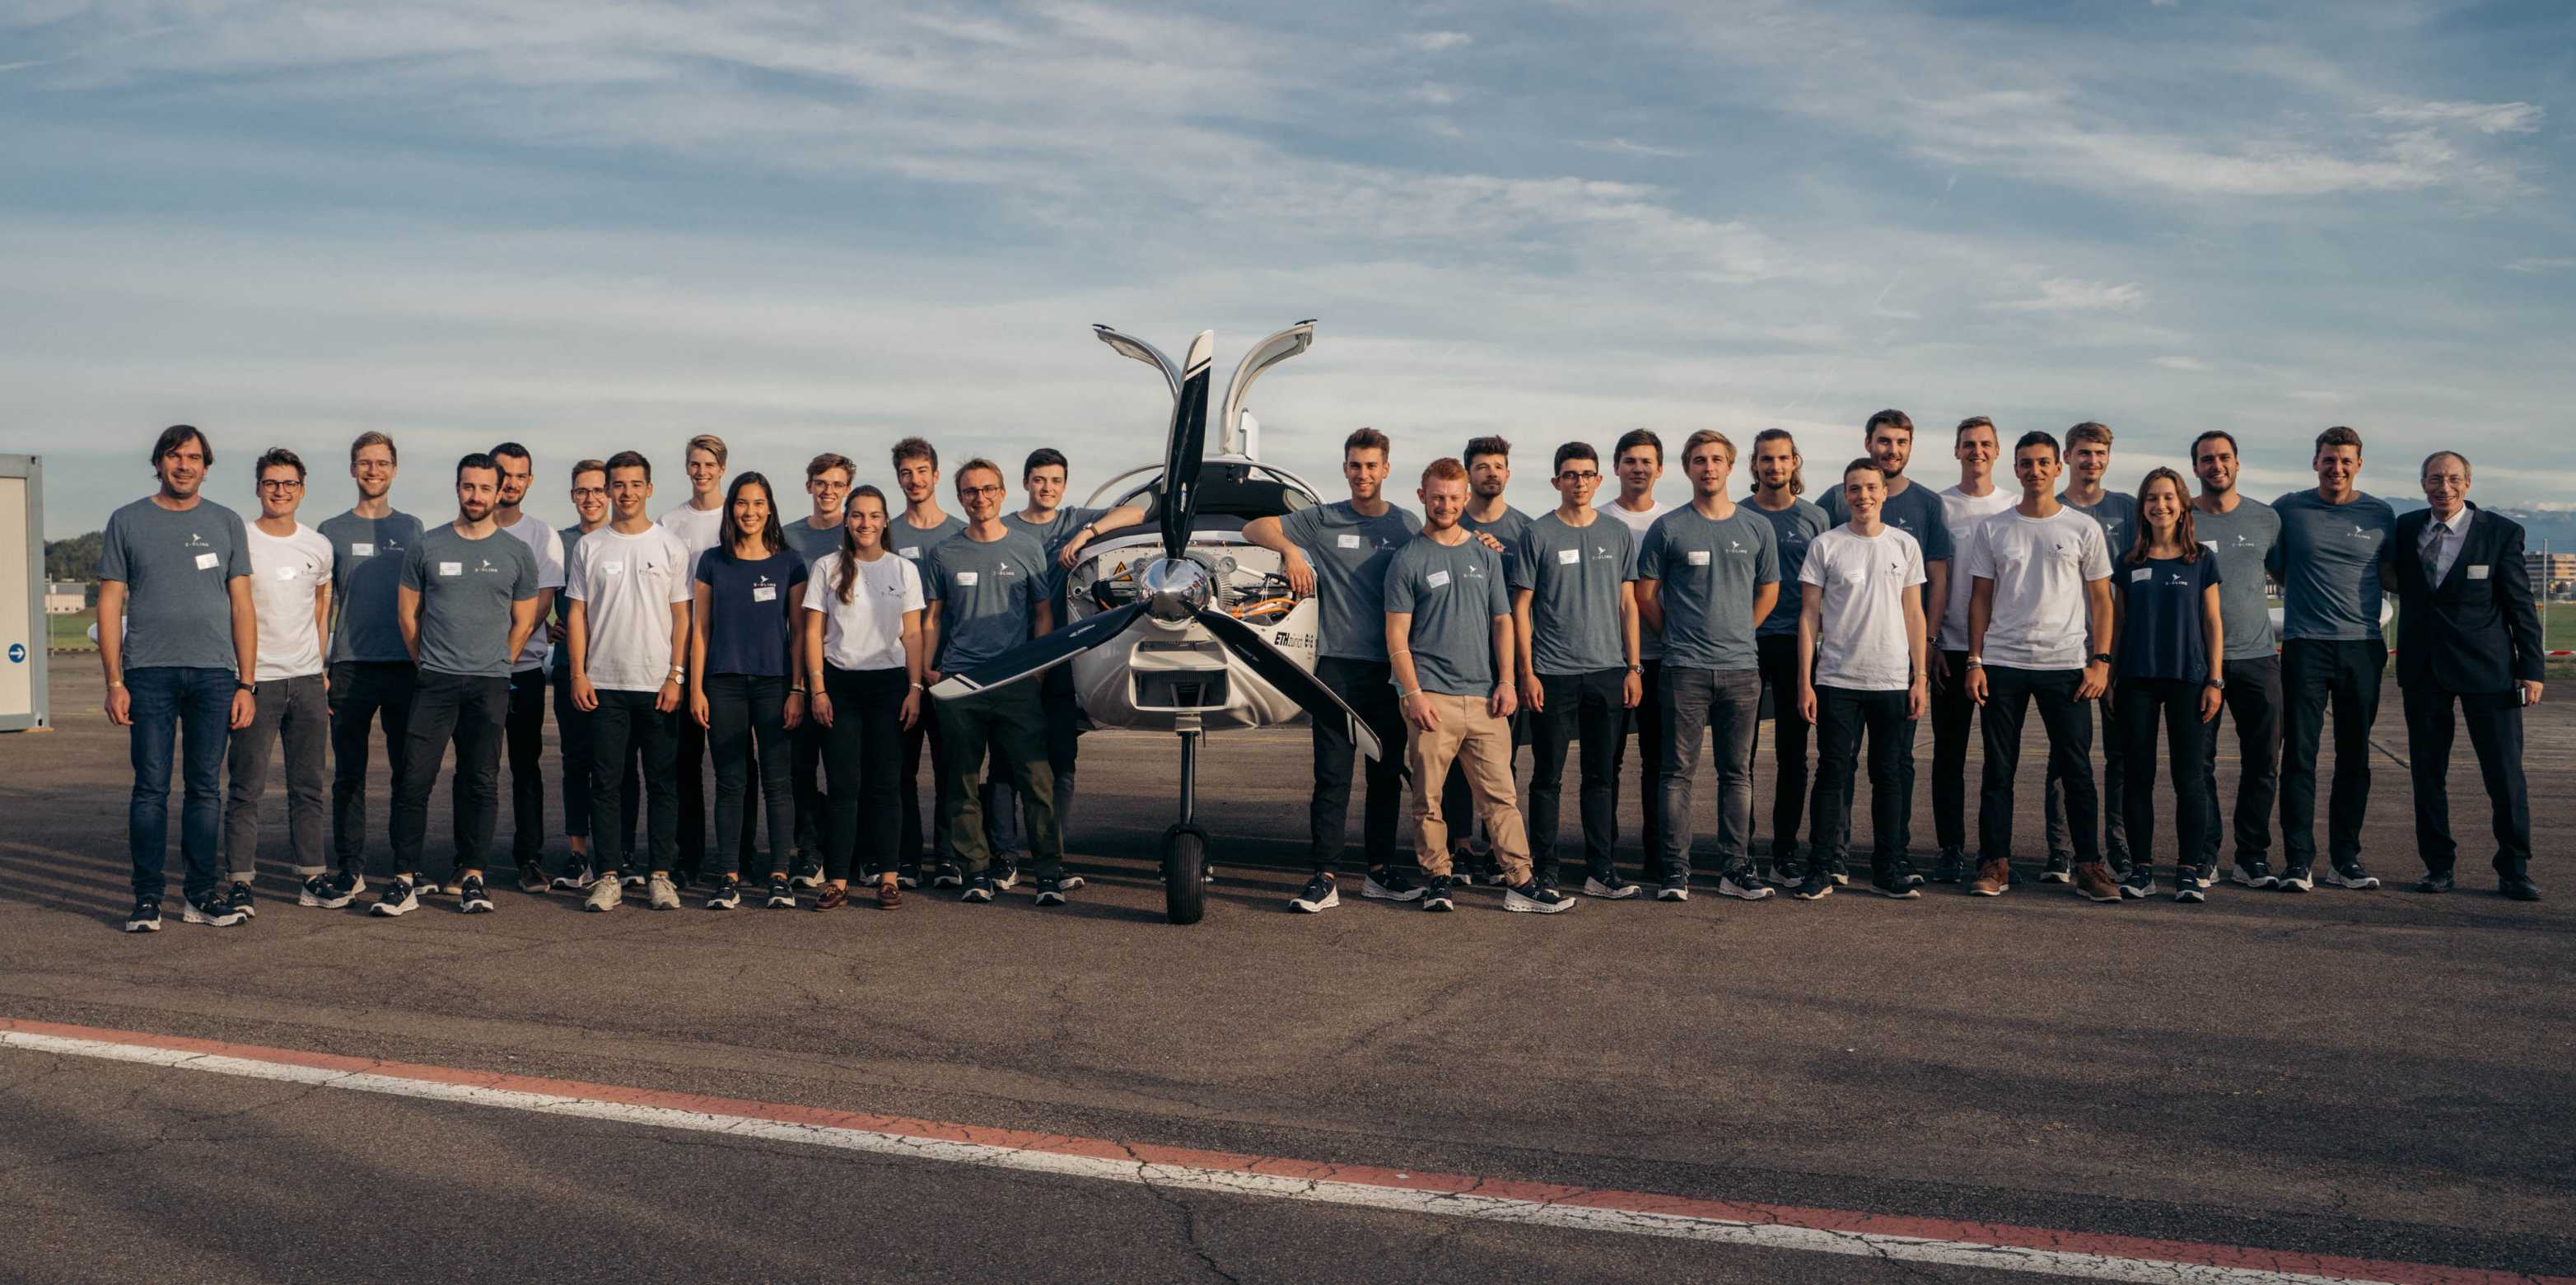 The team of students who developed the "e-Sling" electric aircraft.